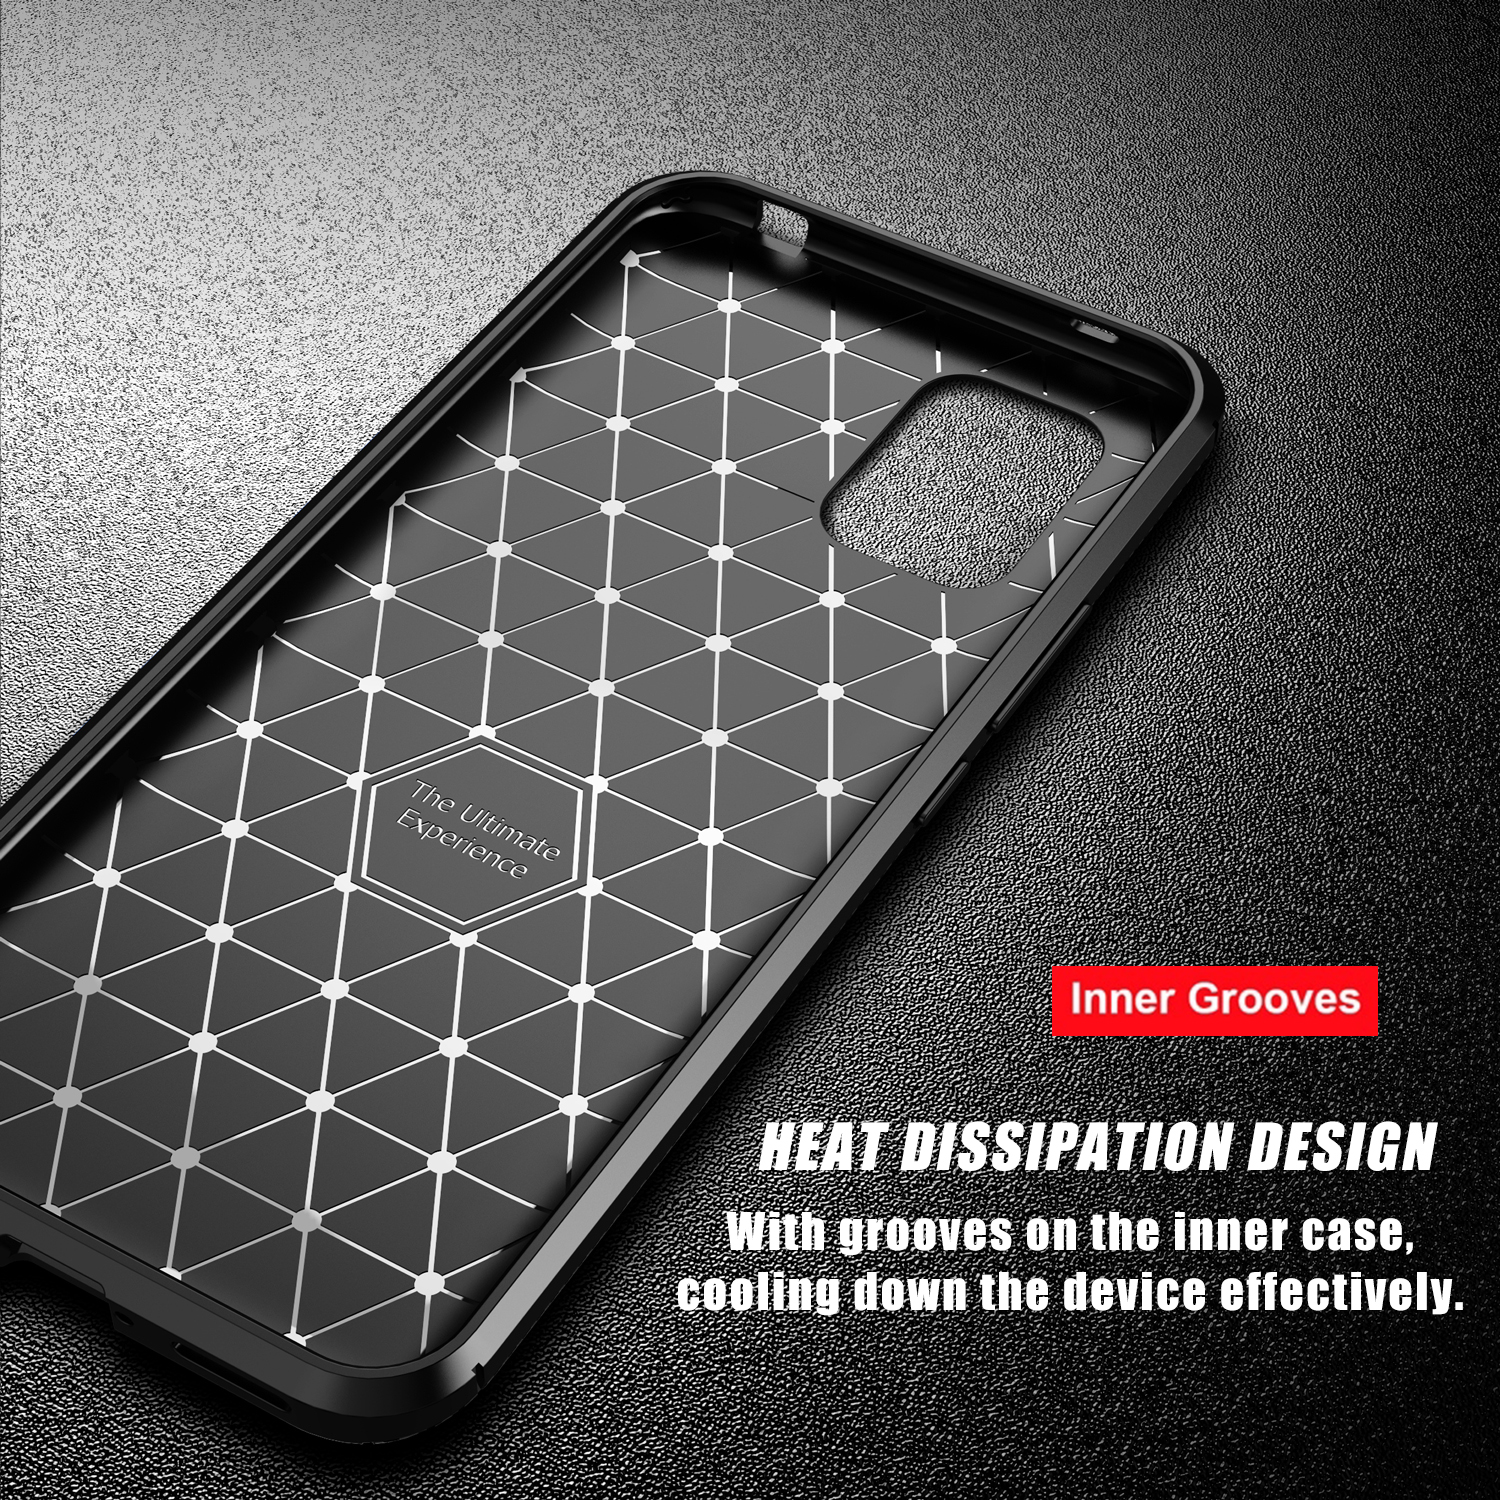 Bakeey for Xiaomi Mi 10 Lite Case Luxury Carbon Fiber Pattern Shockproof Silicone Protective Case Back Cover Non-original